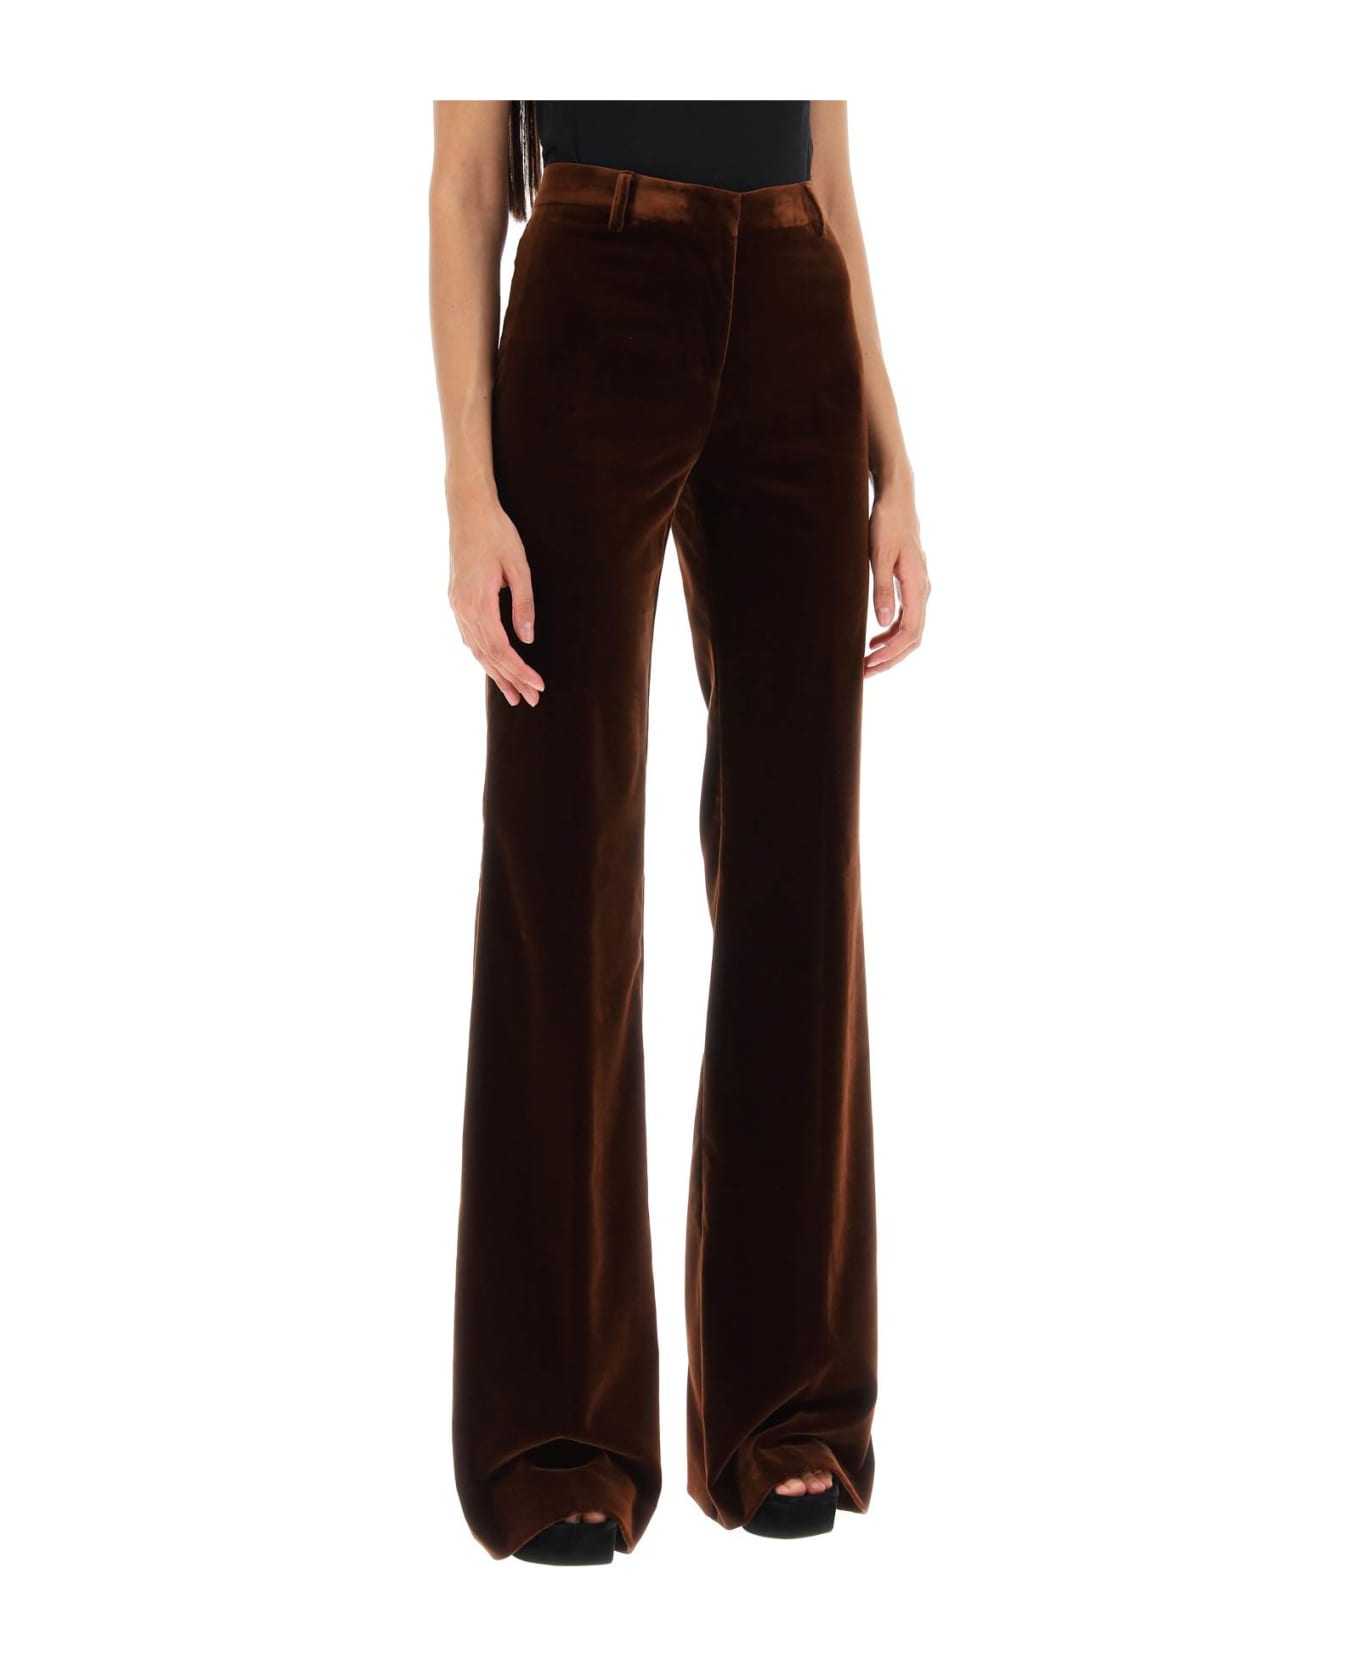 Etro Cotton Trousers - BROWN (Brown) ボトムス